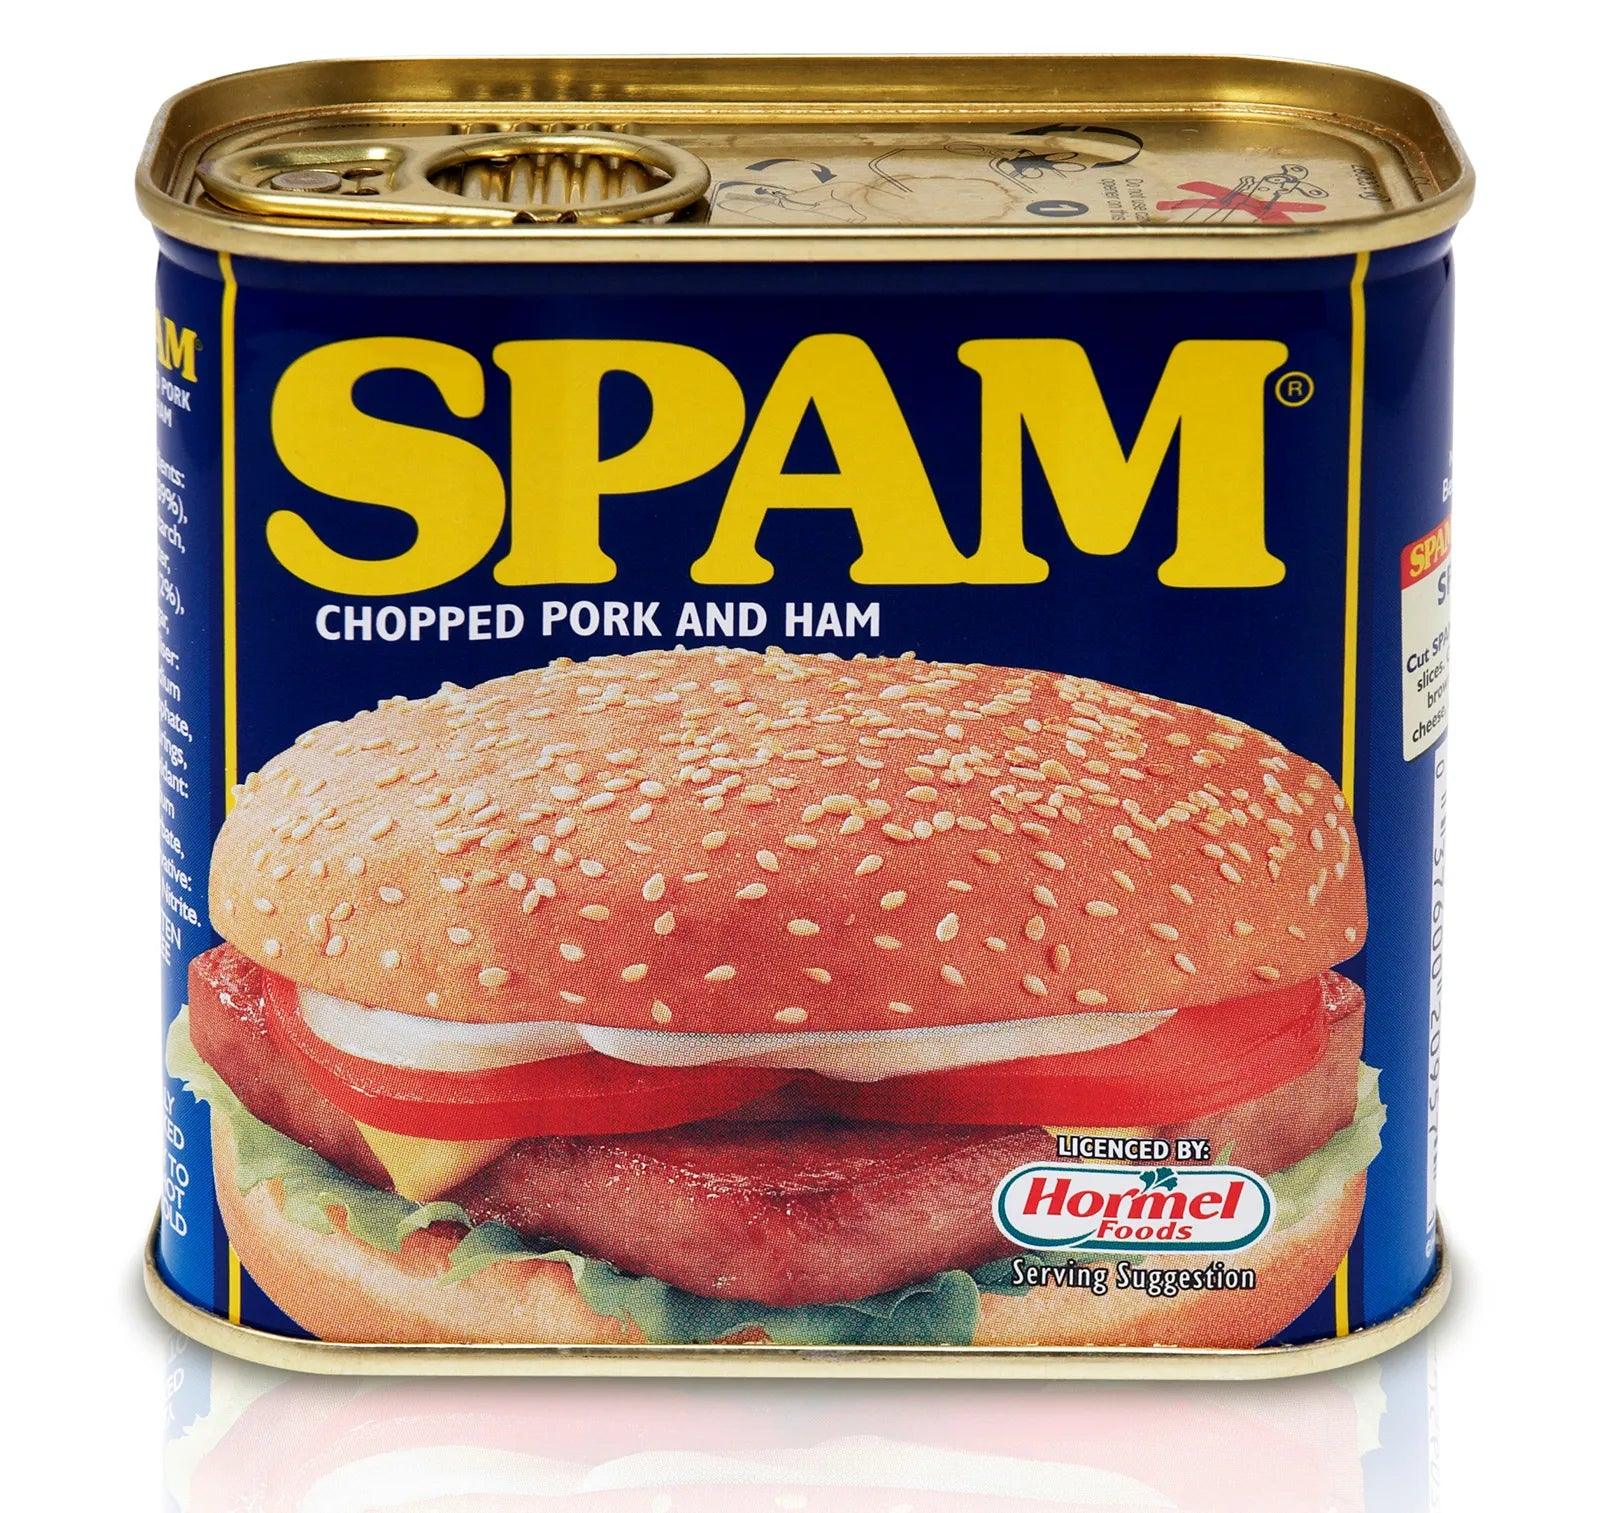 Pop! Ad Icons - SPAM Can - #80 - Hobby Champion Inc